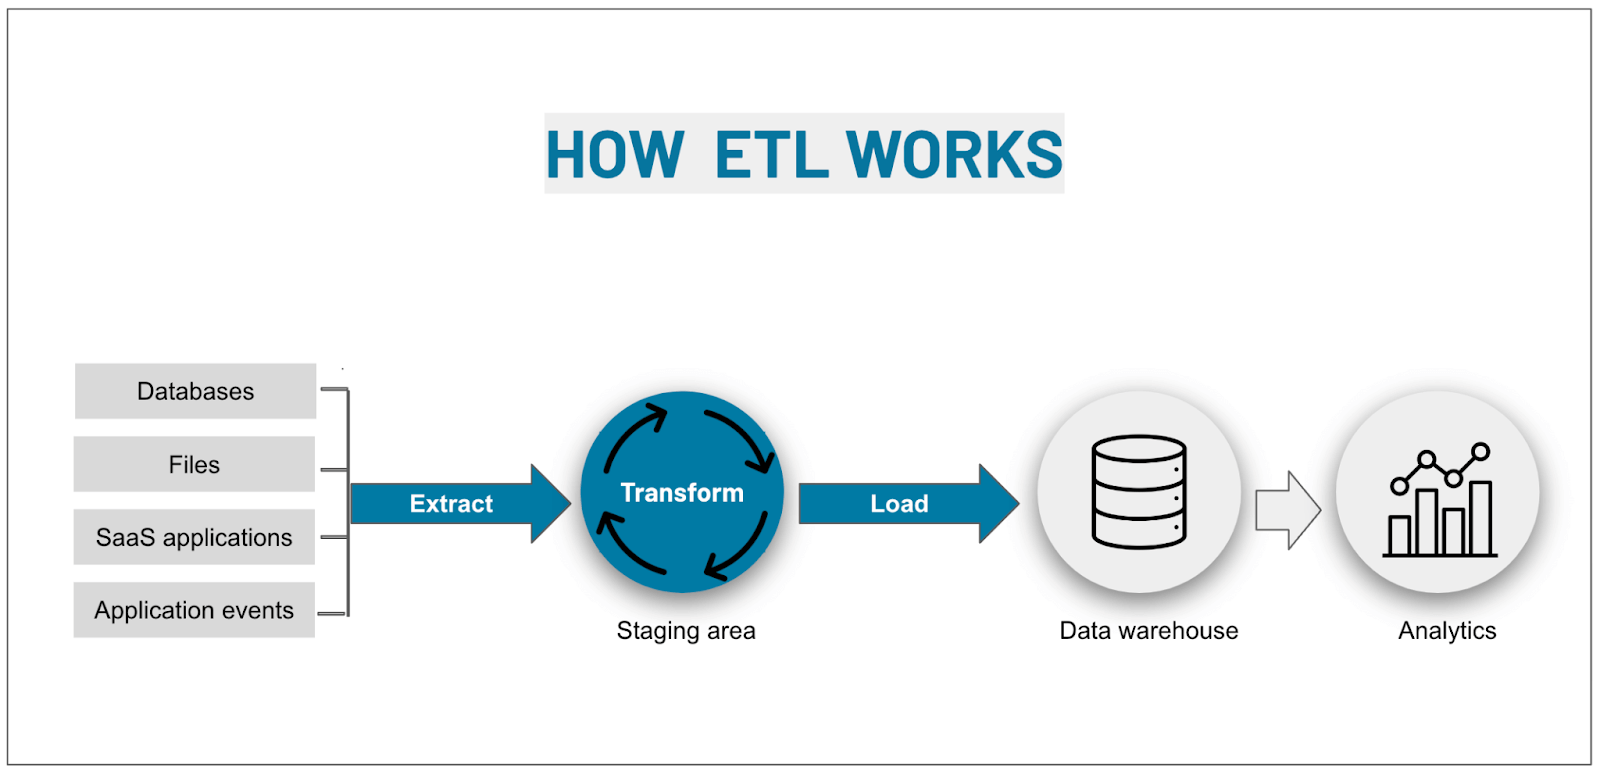 aws extract transform and load etl service